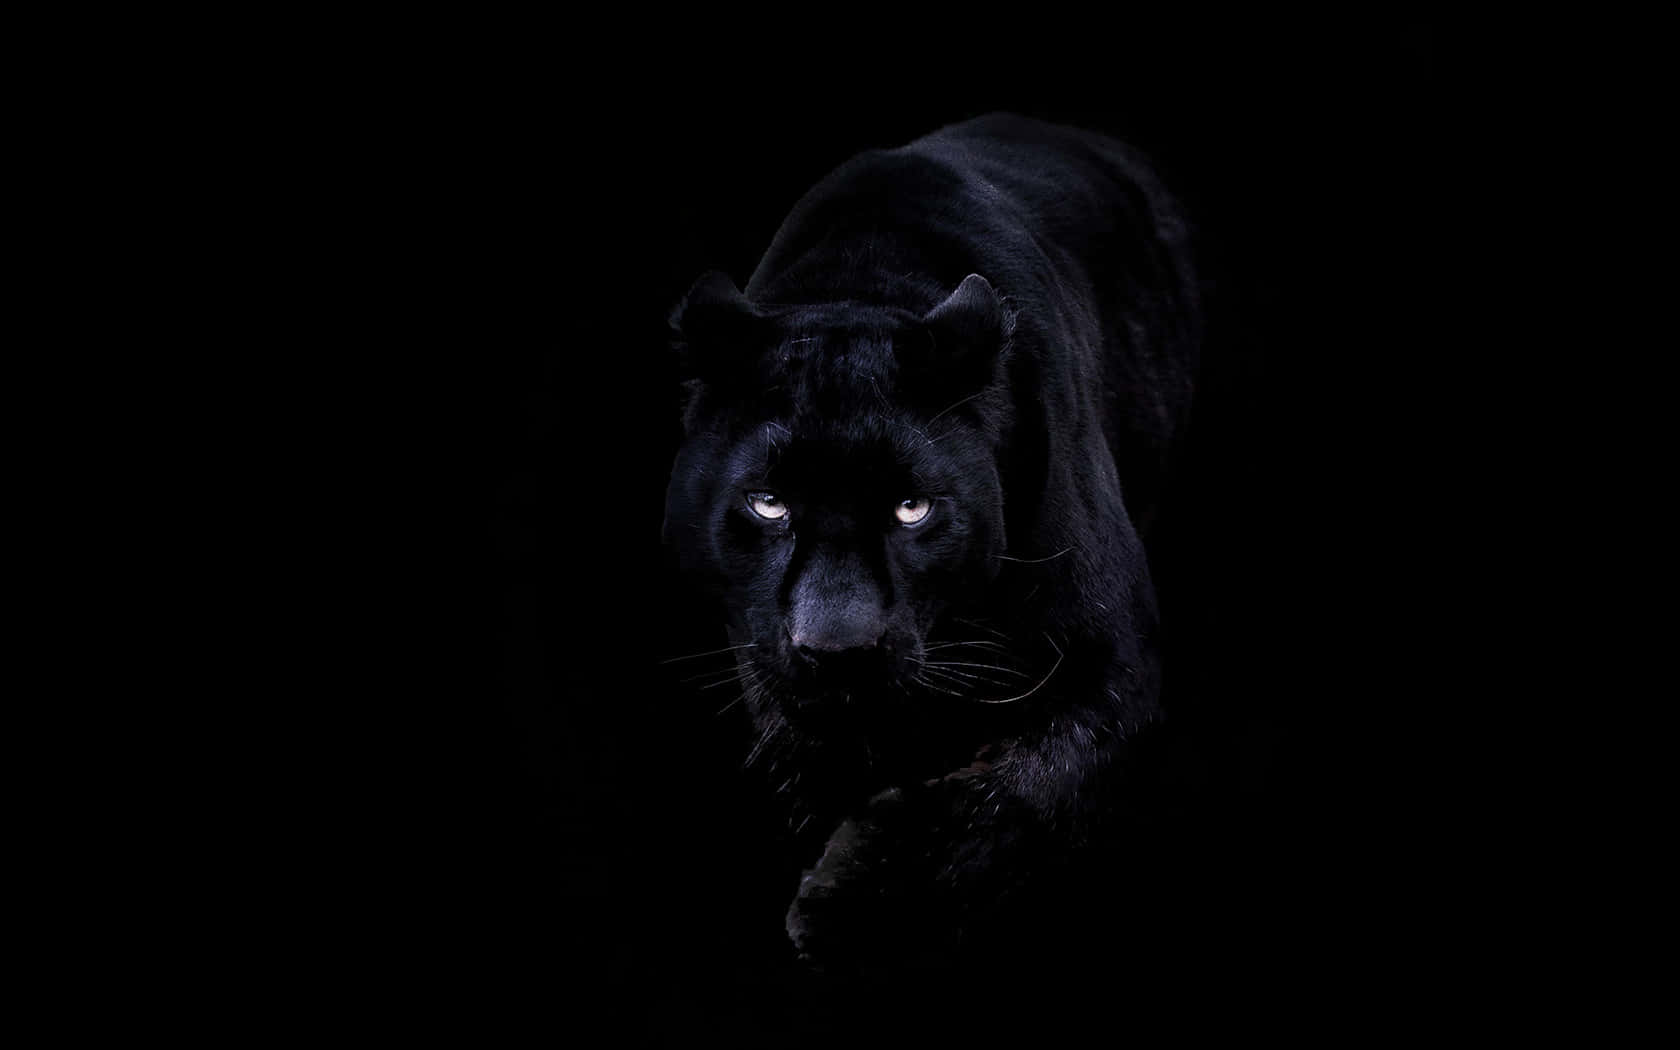 A Black Panther Is Walking In The Dark Wallpaper